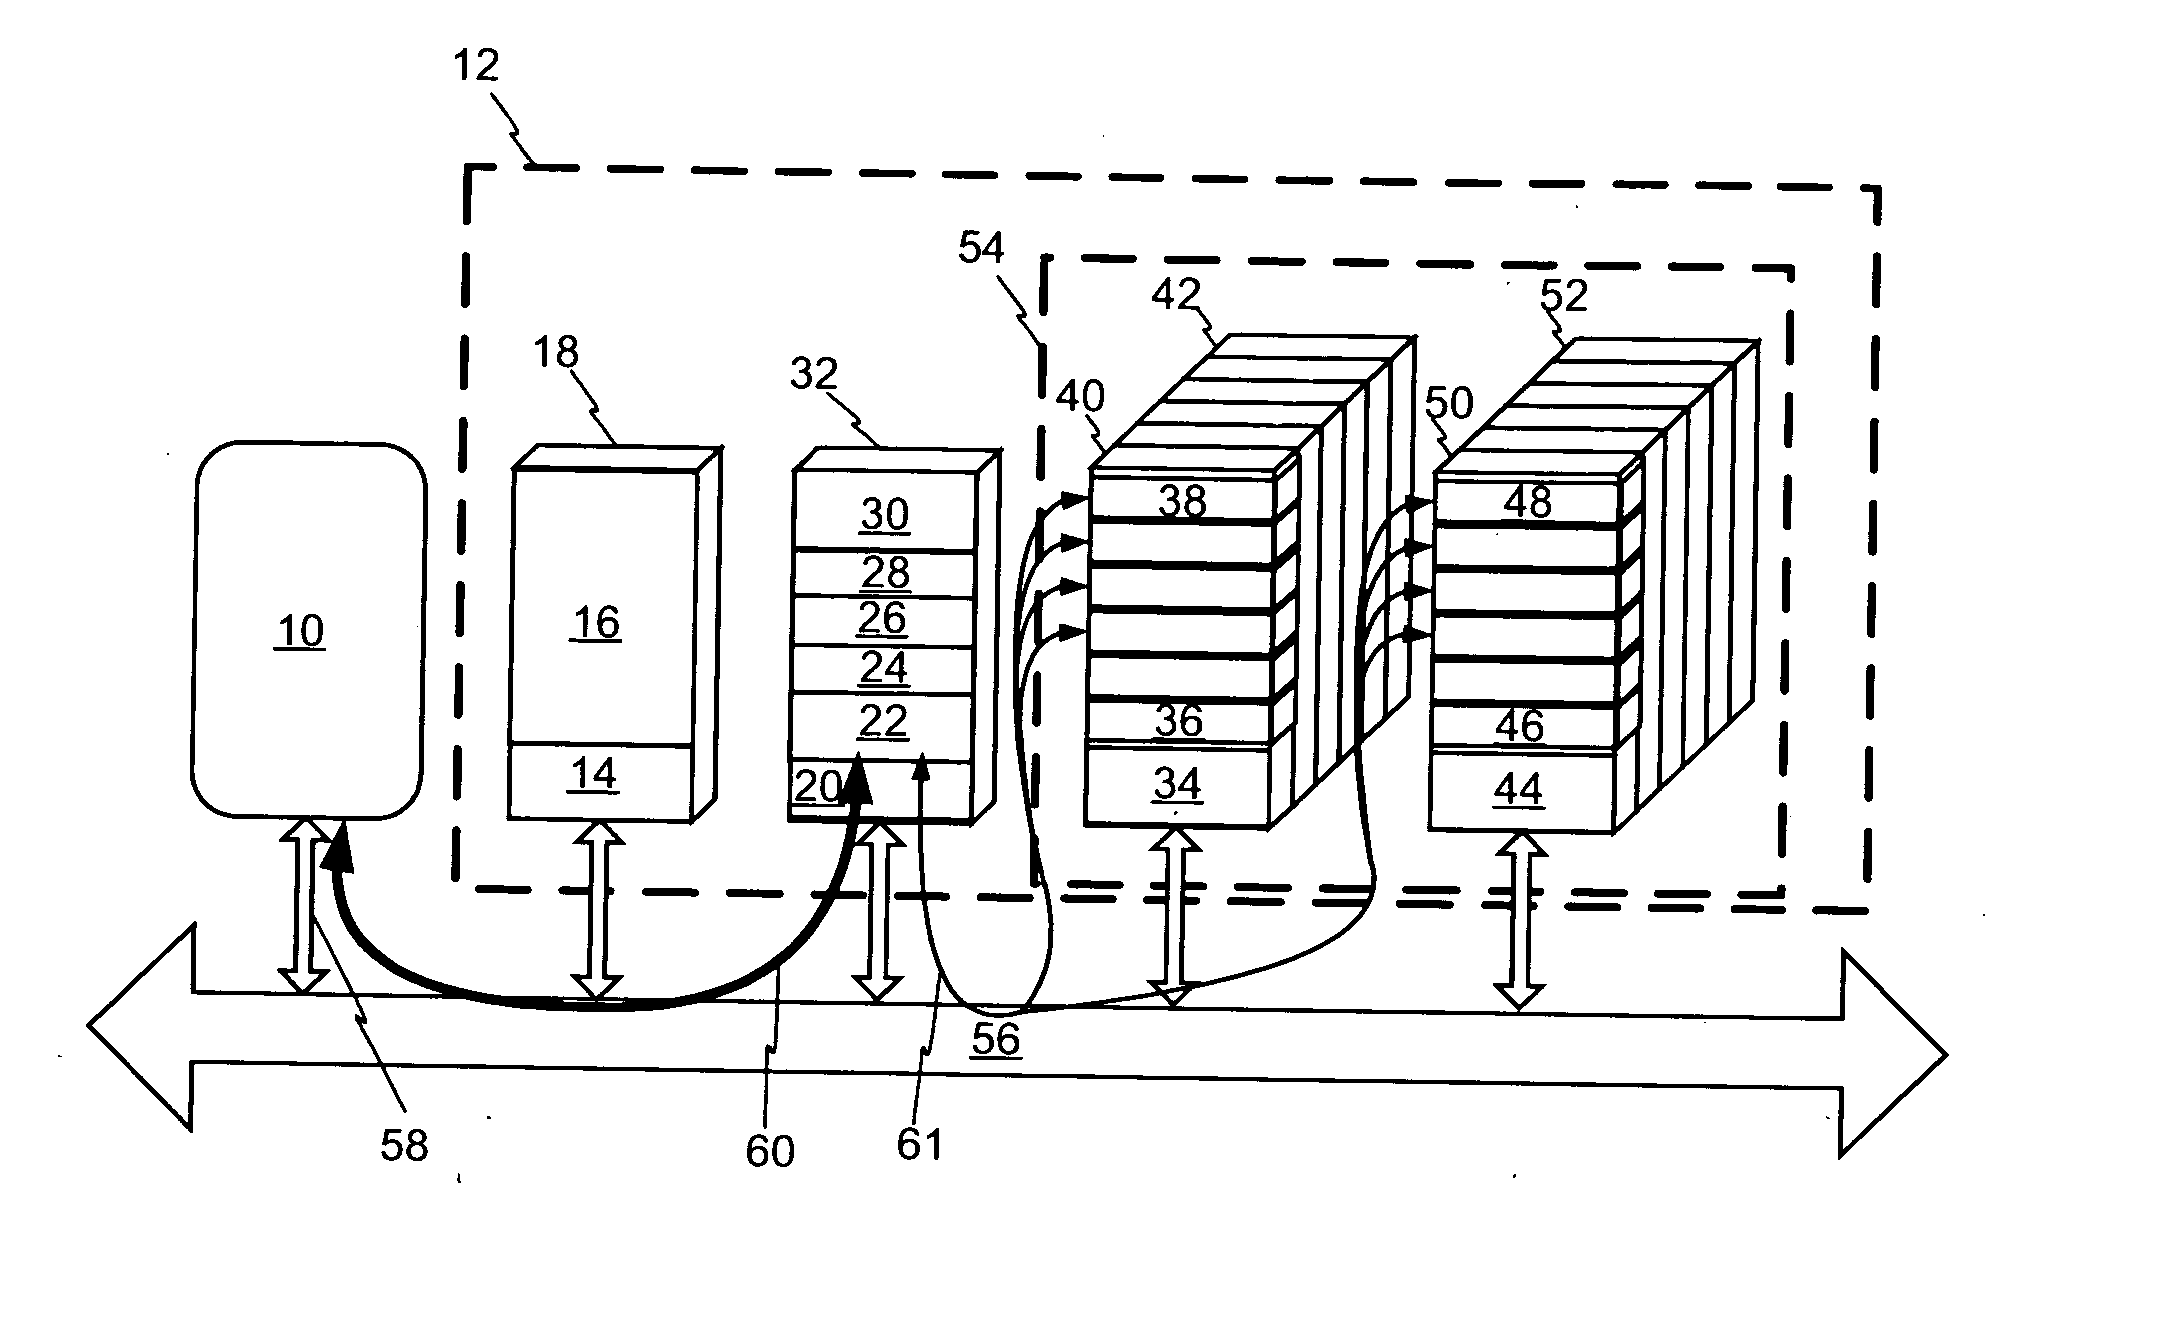 Distributed processing RAID system